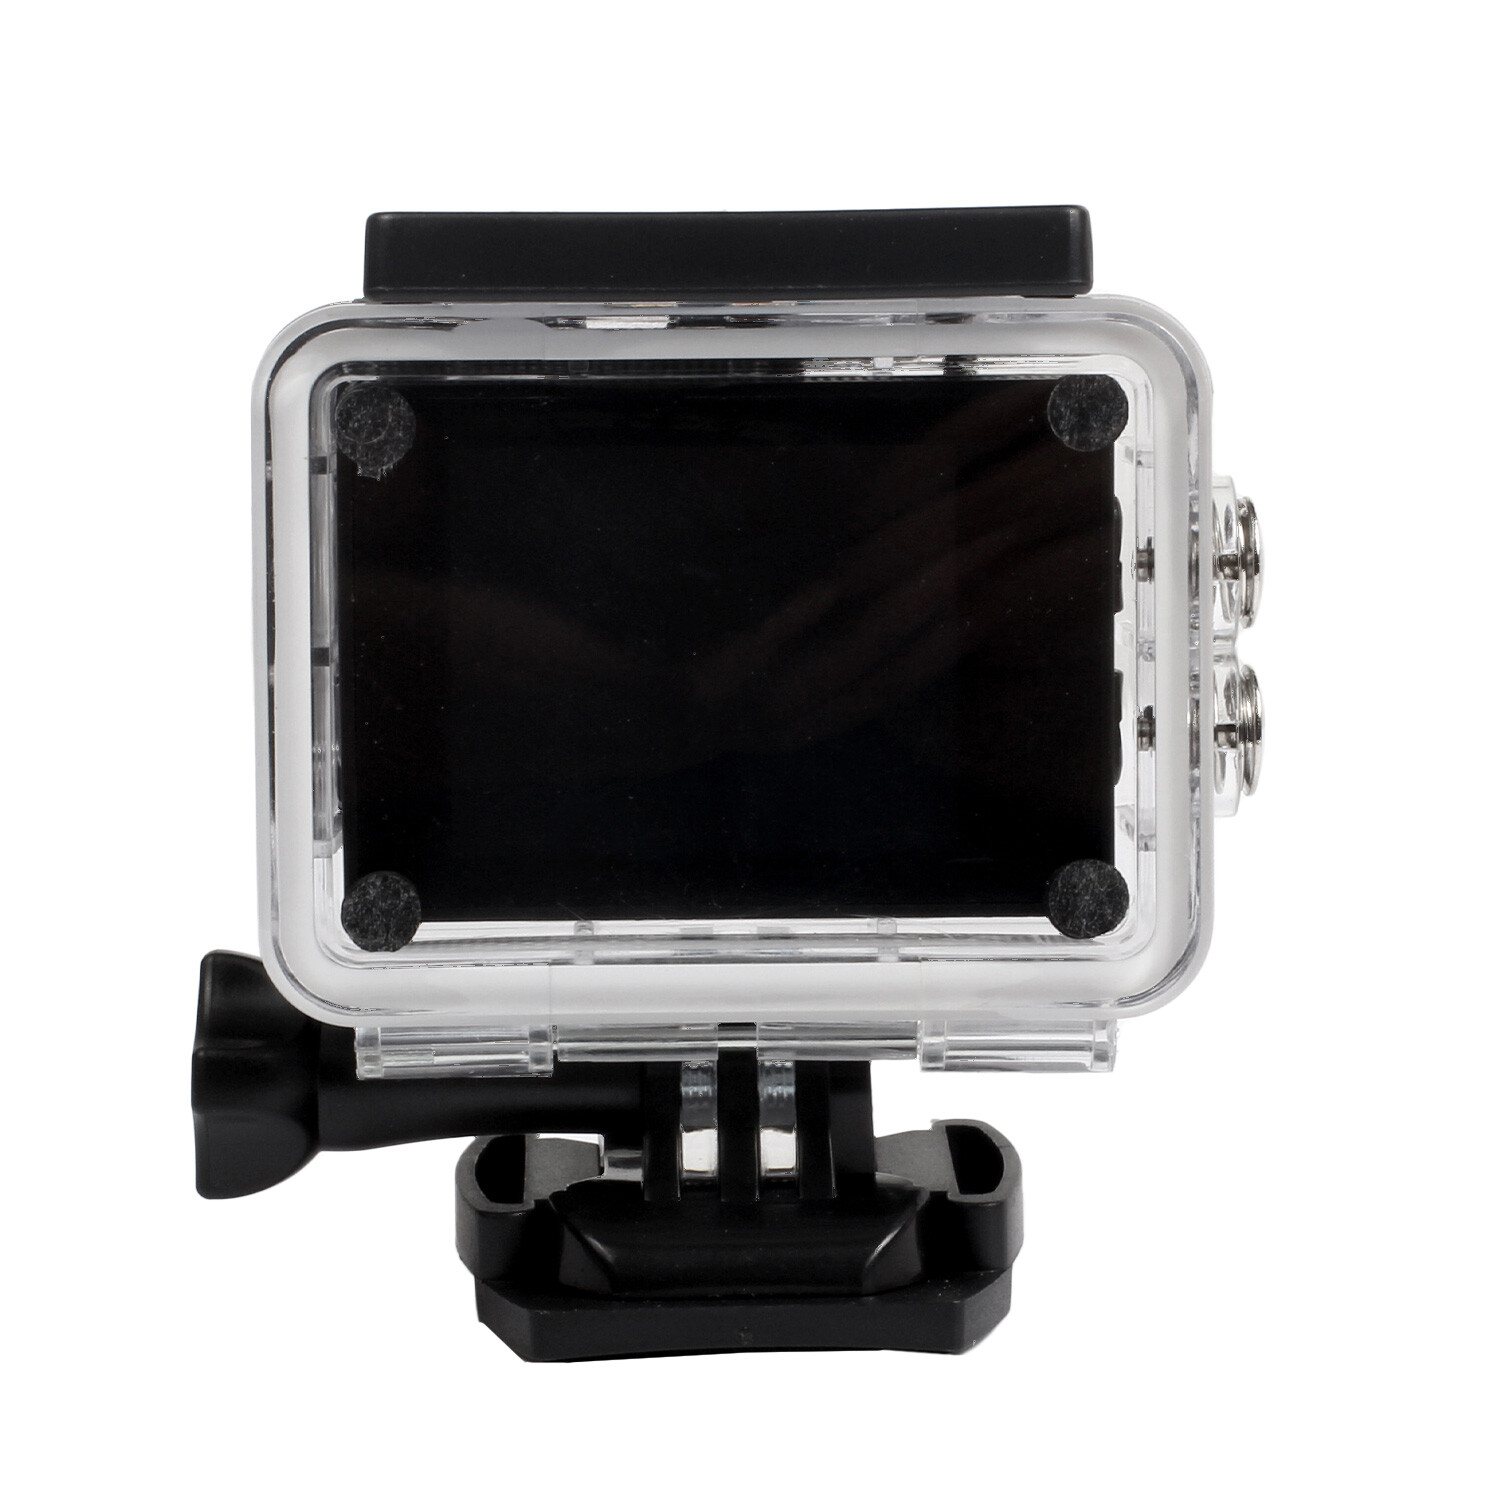 Action Camera with SD Card - Black Image 2